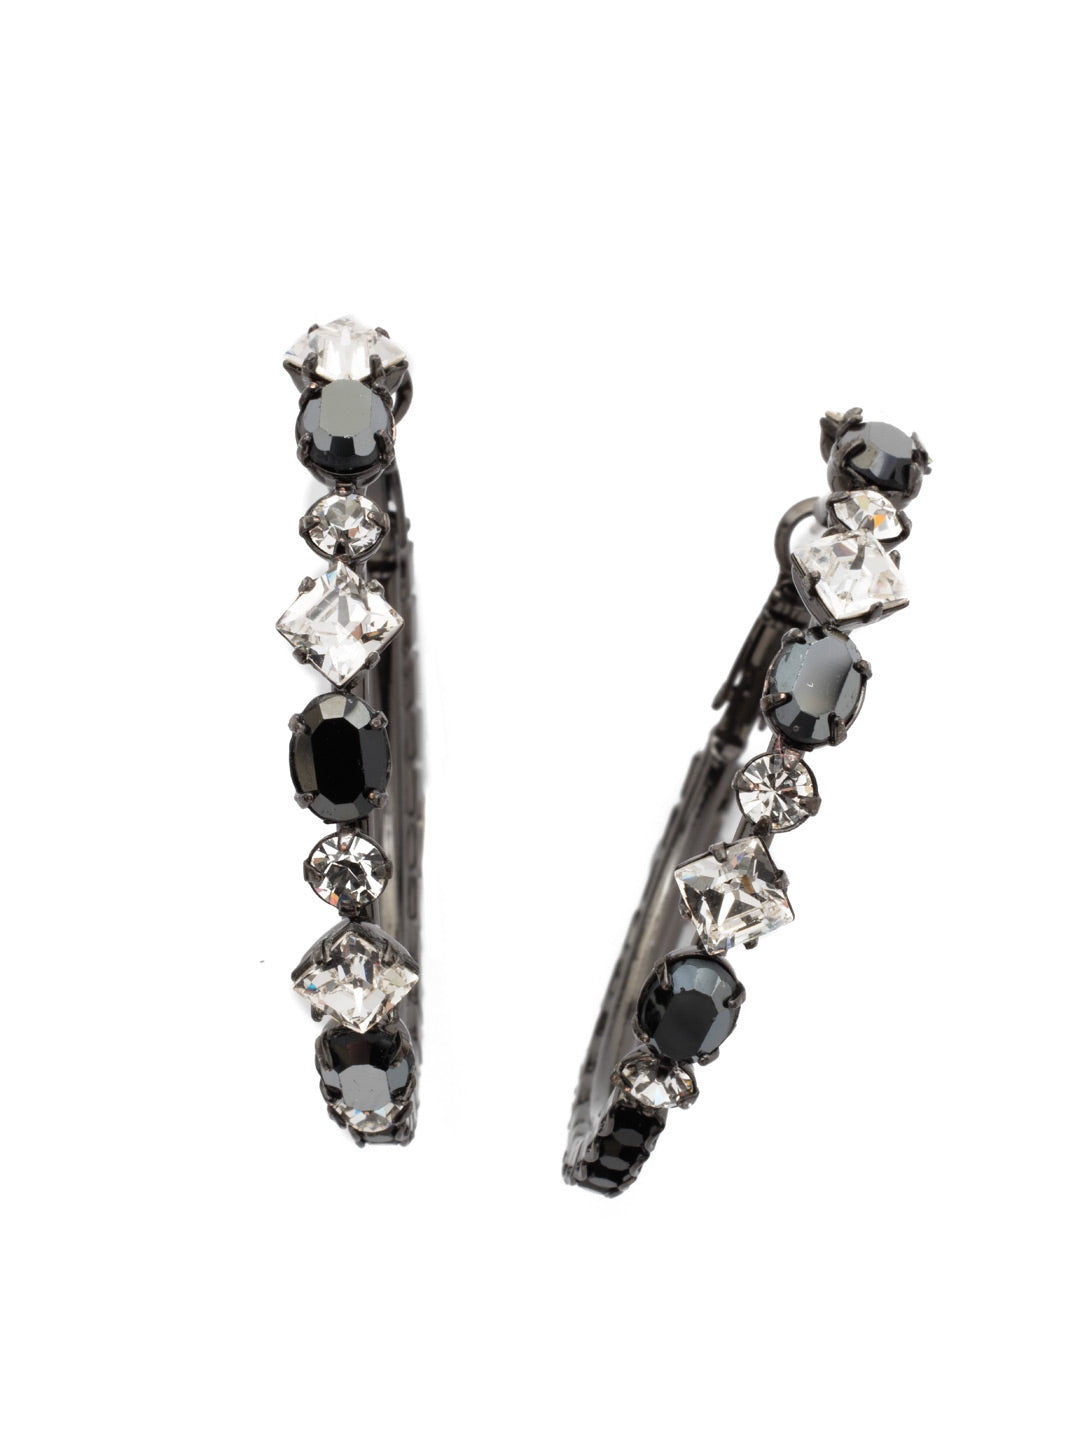 Sicily Hoop Earrings - EEA23GMMMO - These hoop earrings are packed with sparkle, lined with a beautiful assortment of crystals. From Sorrelli's Midnight Moon collection in our Gun Metal finish.